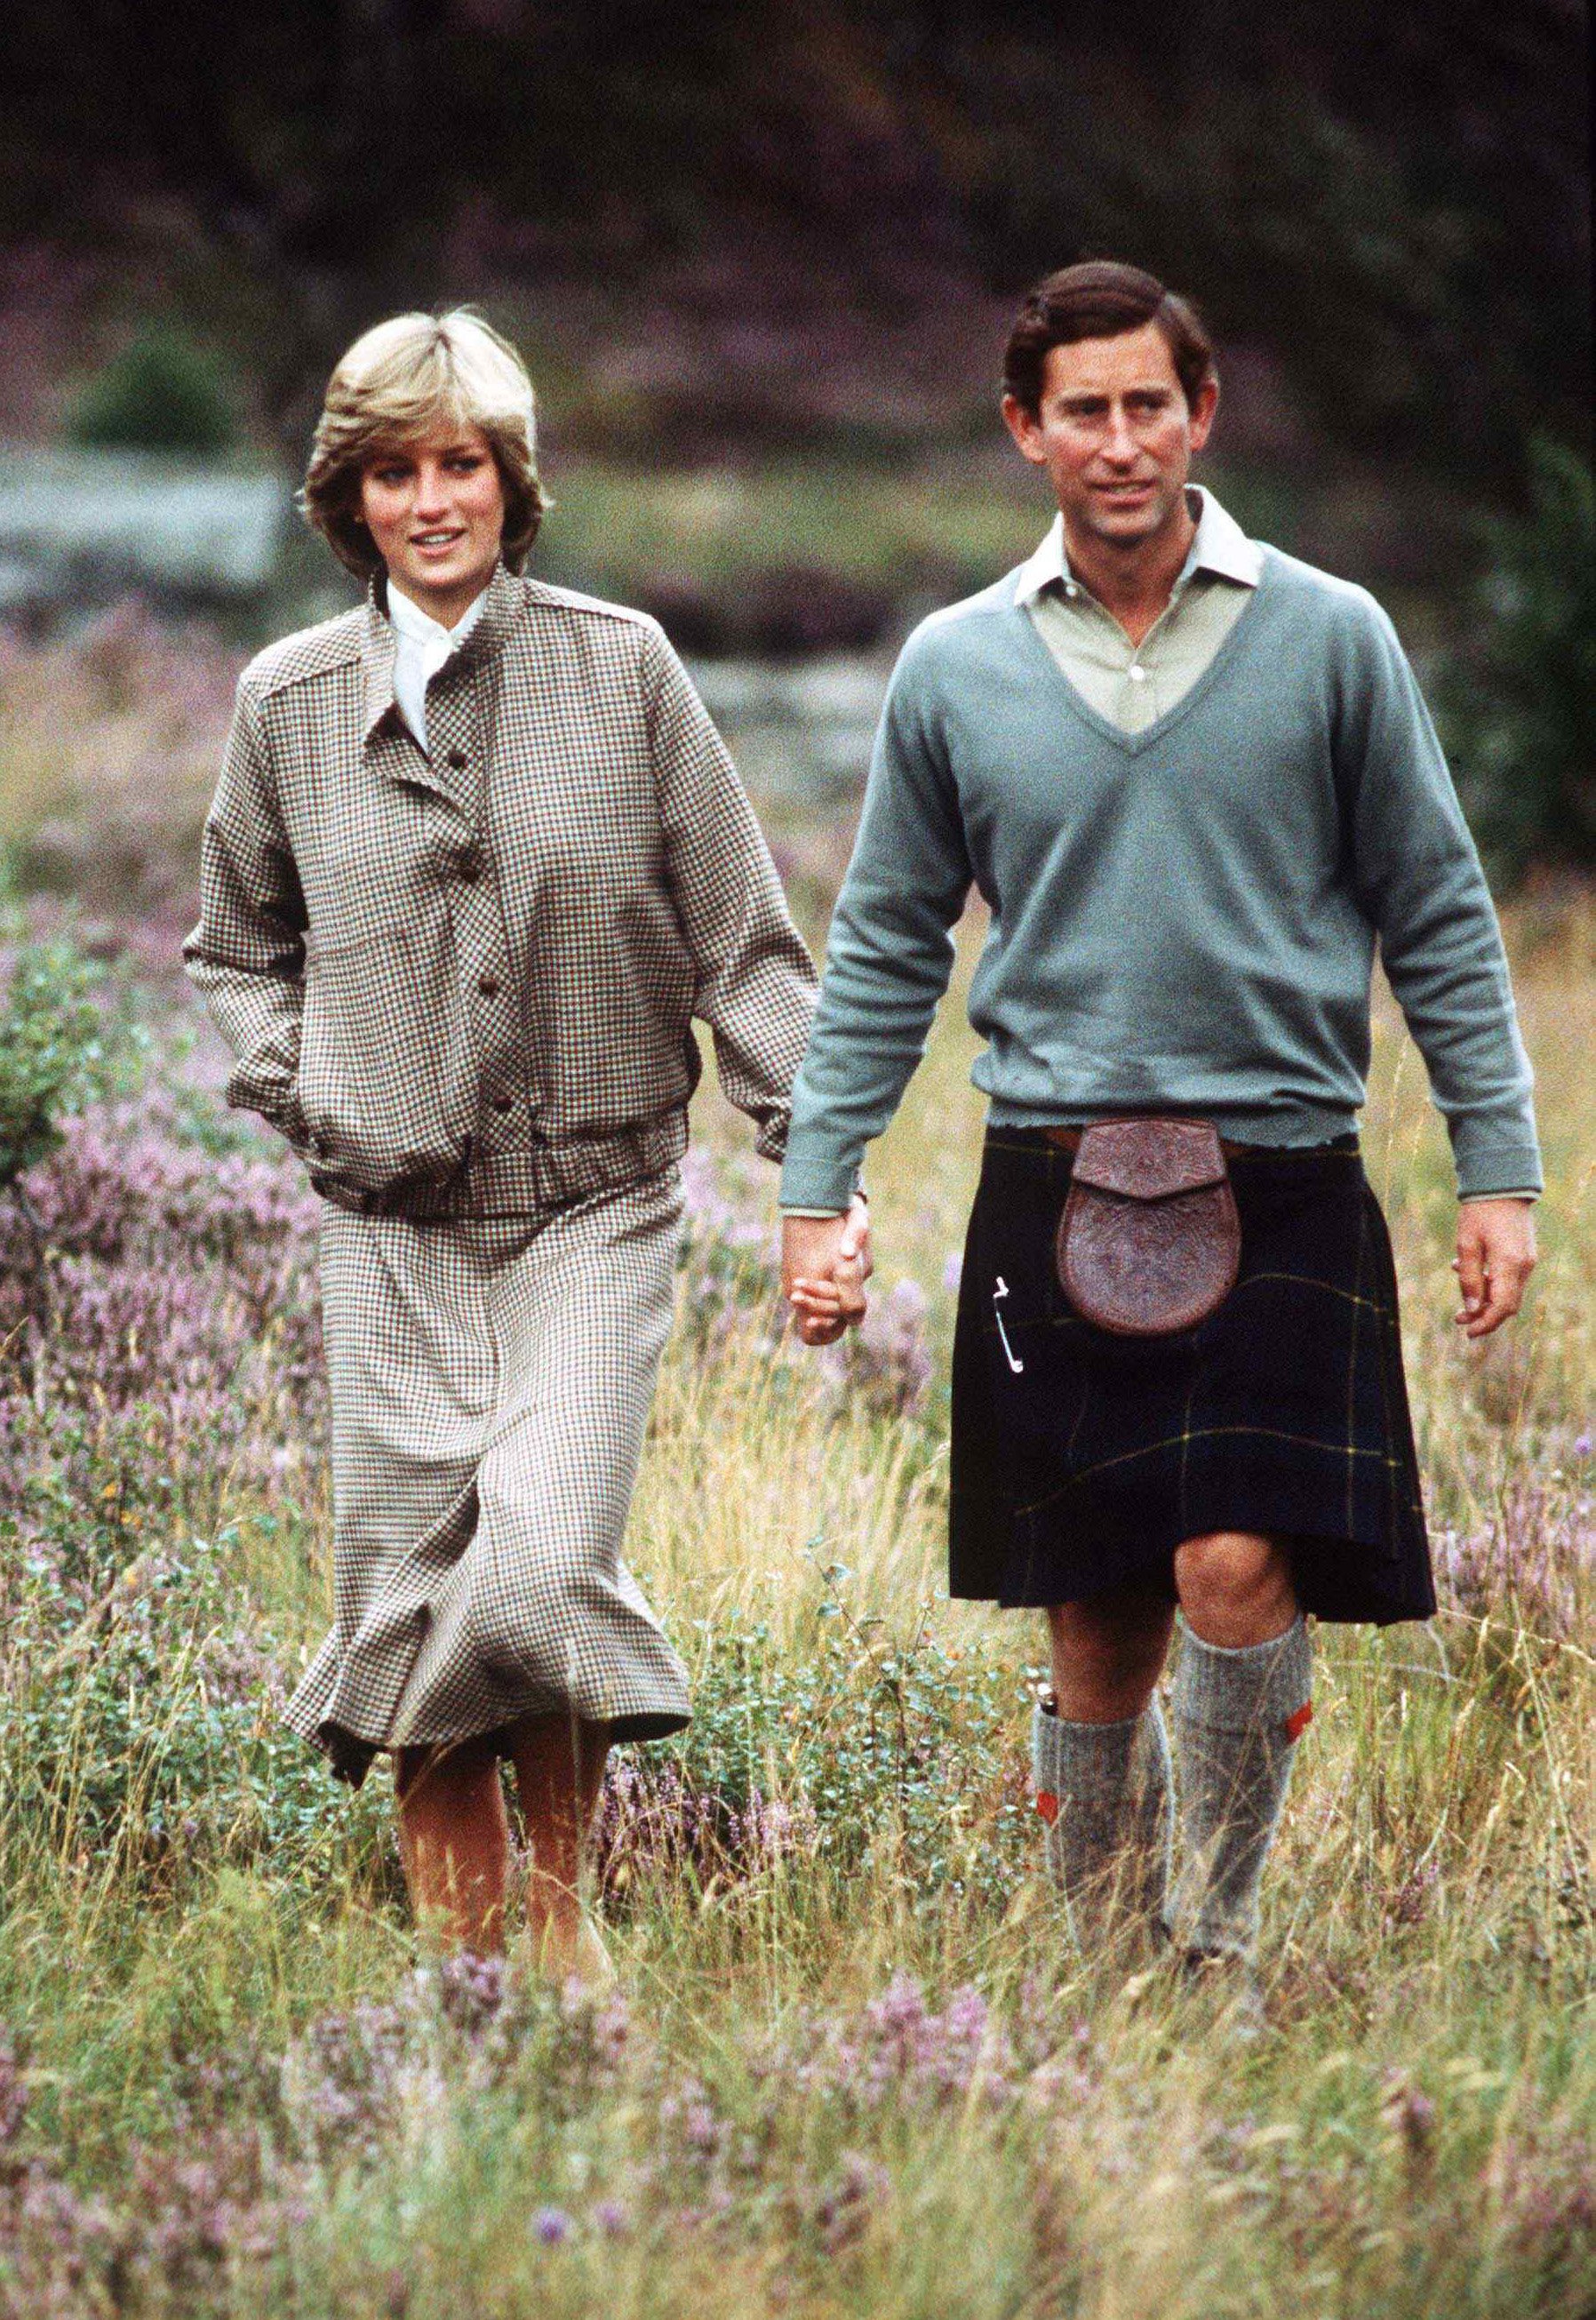 Prince Charles Actually Met Princess Diana While He Was Dating Her Sister